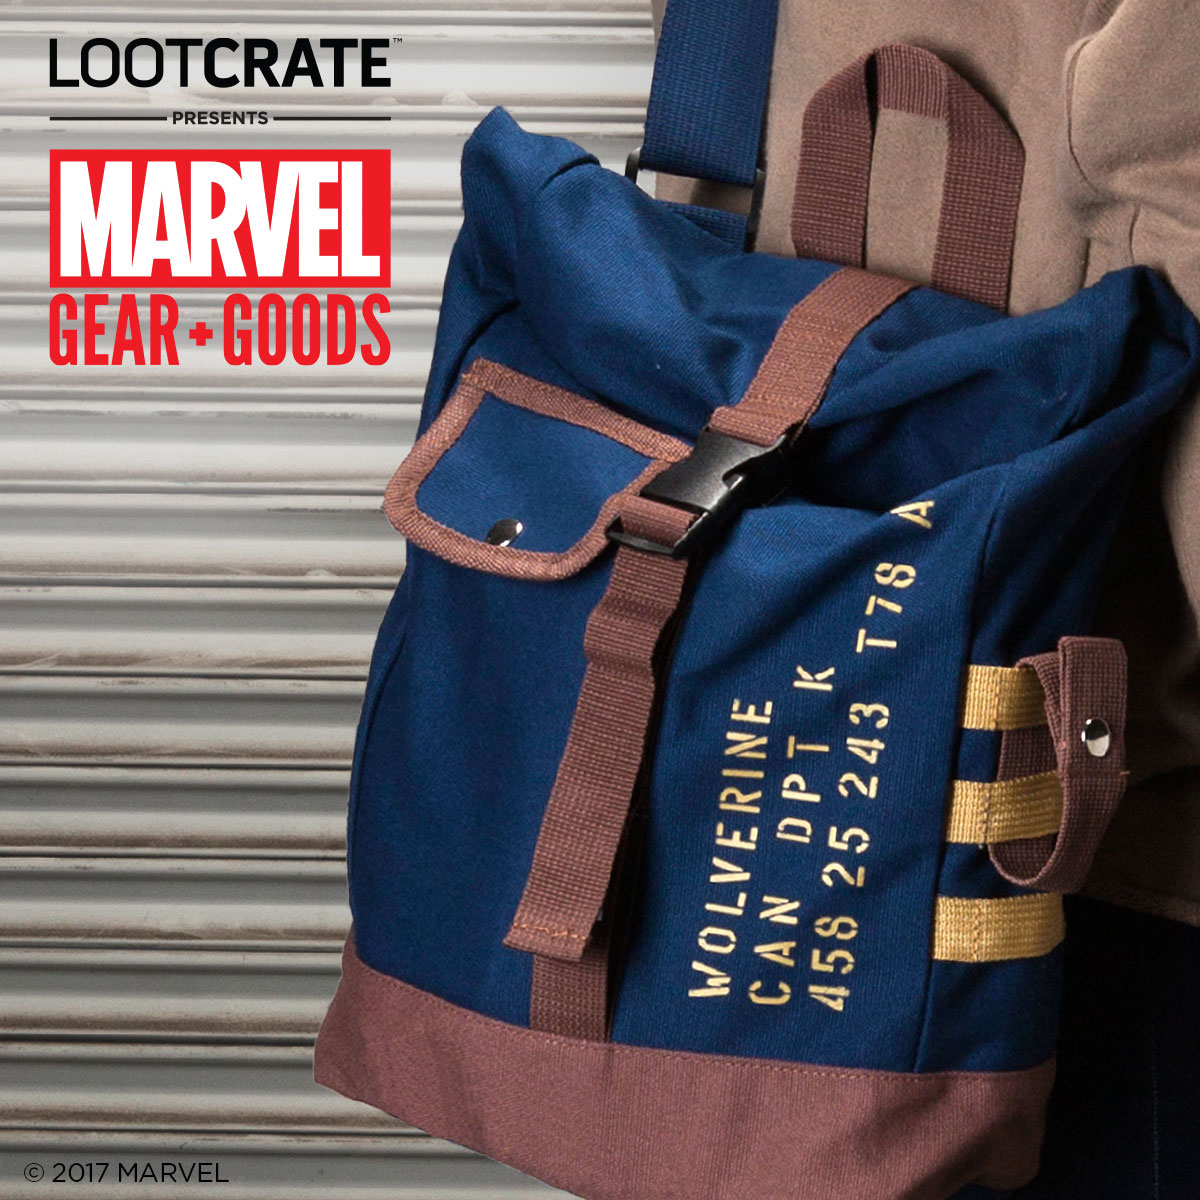 Marvel Gear + Goods March Weapon X Loot Crate Includes